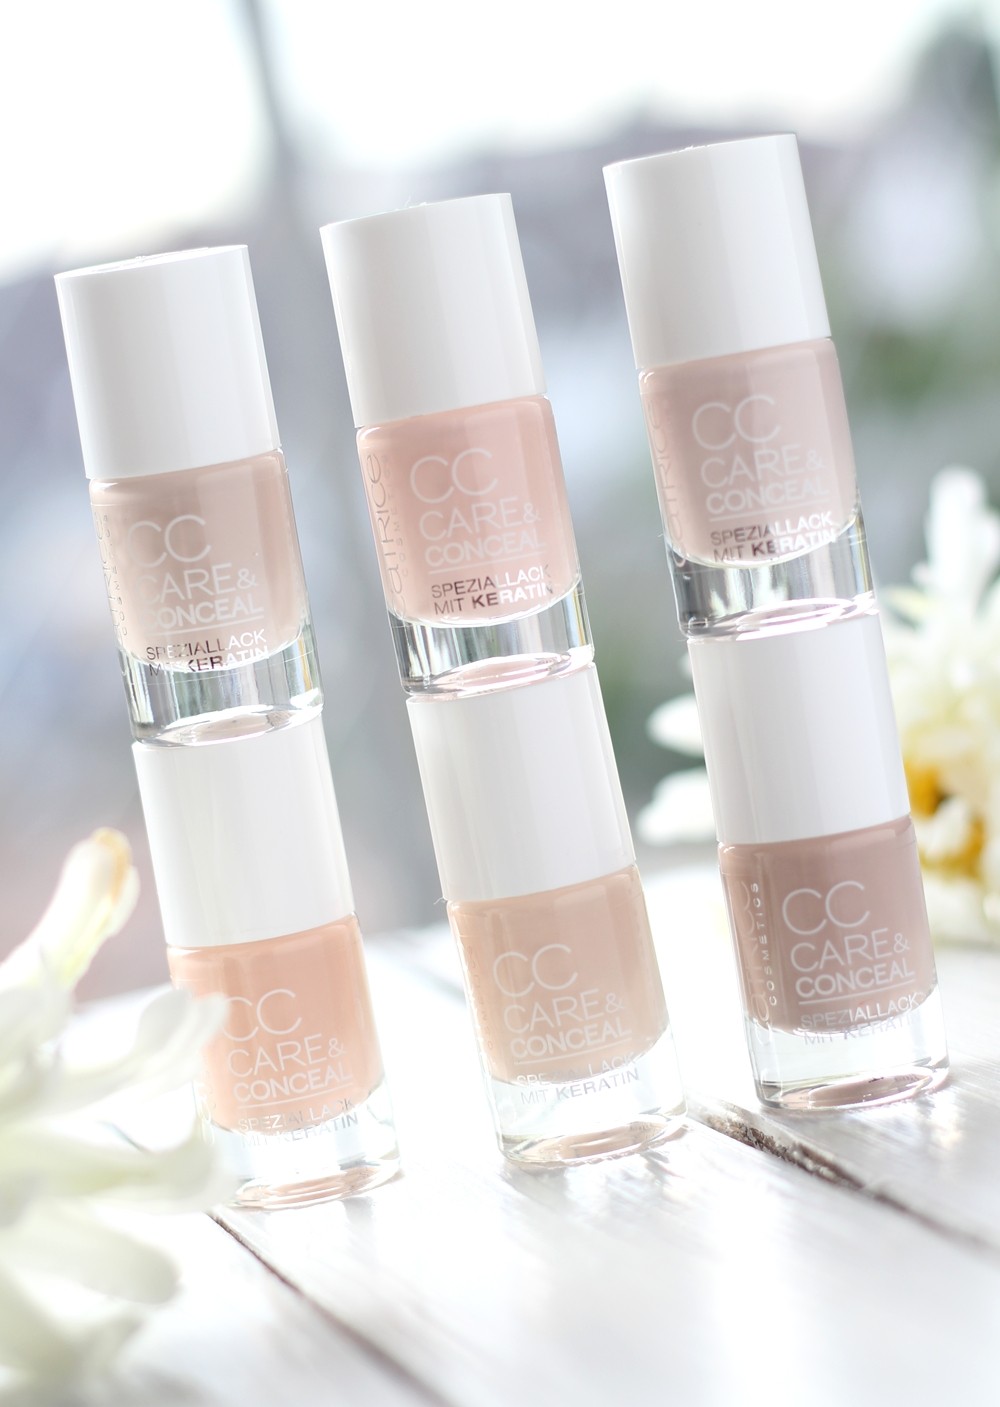 Catrice CC Care and Concealer Nagellack Nude